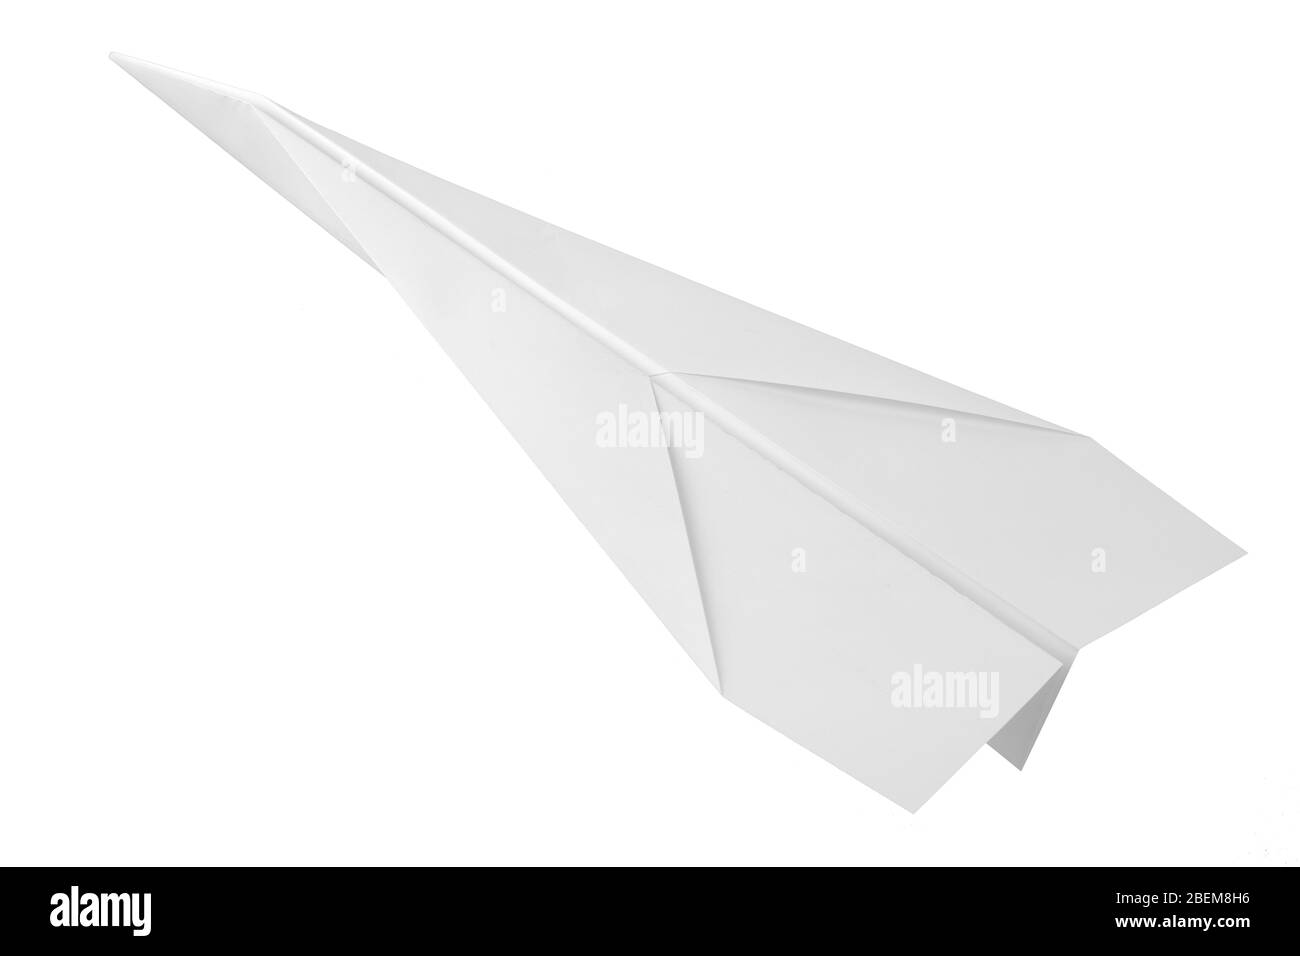 White paper dart plane from above isolated on white with clipping path Stock Photo